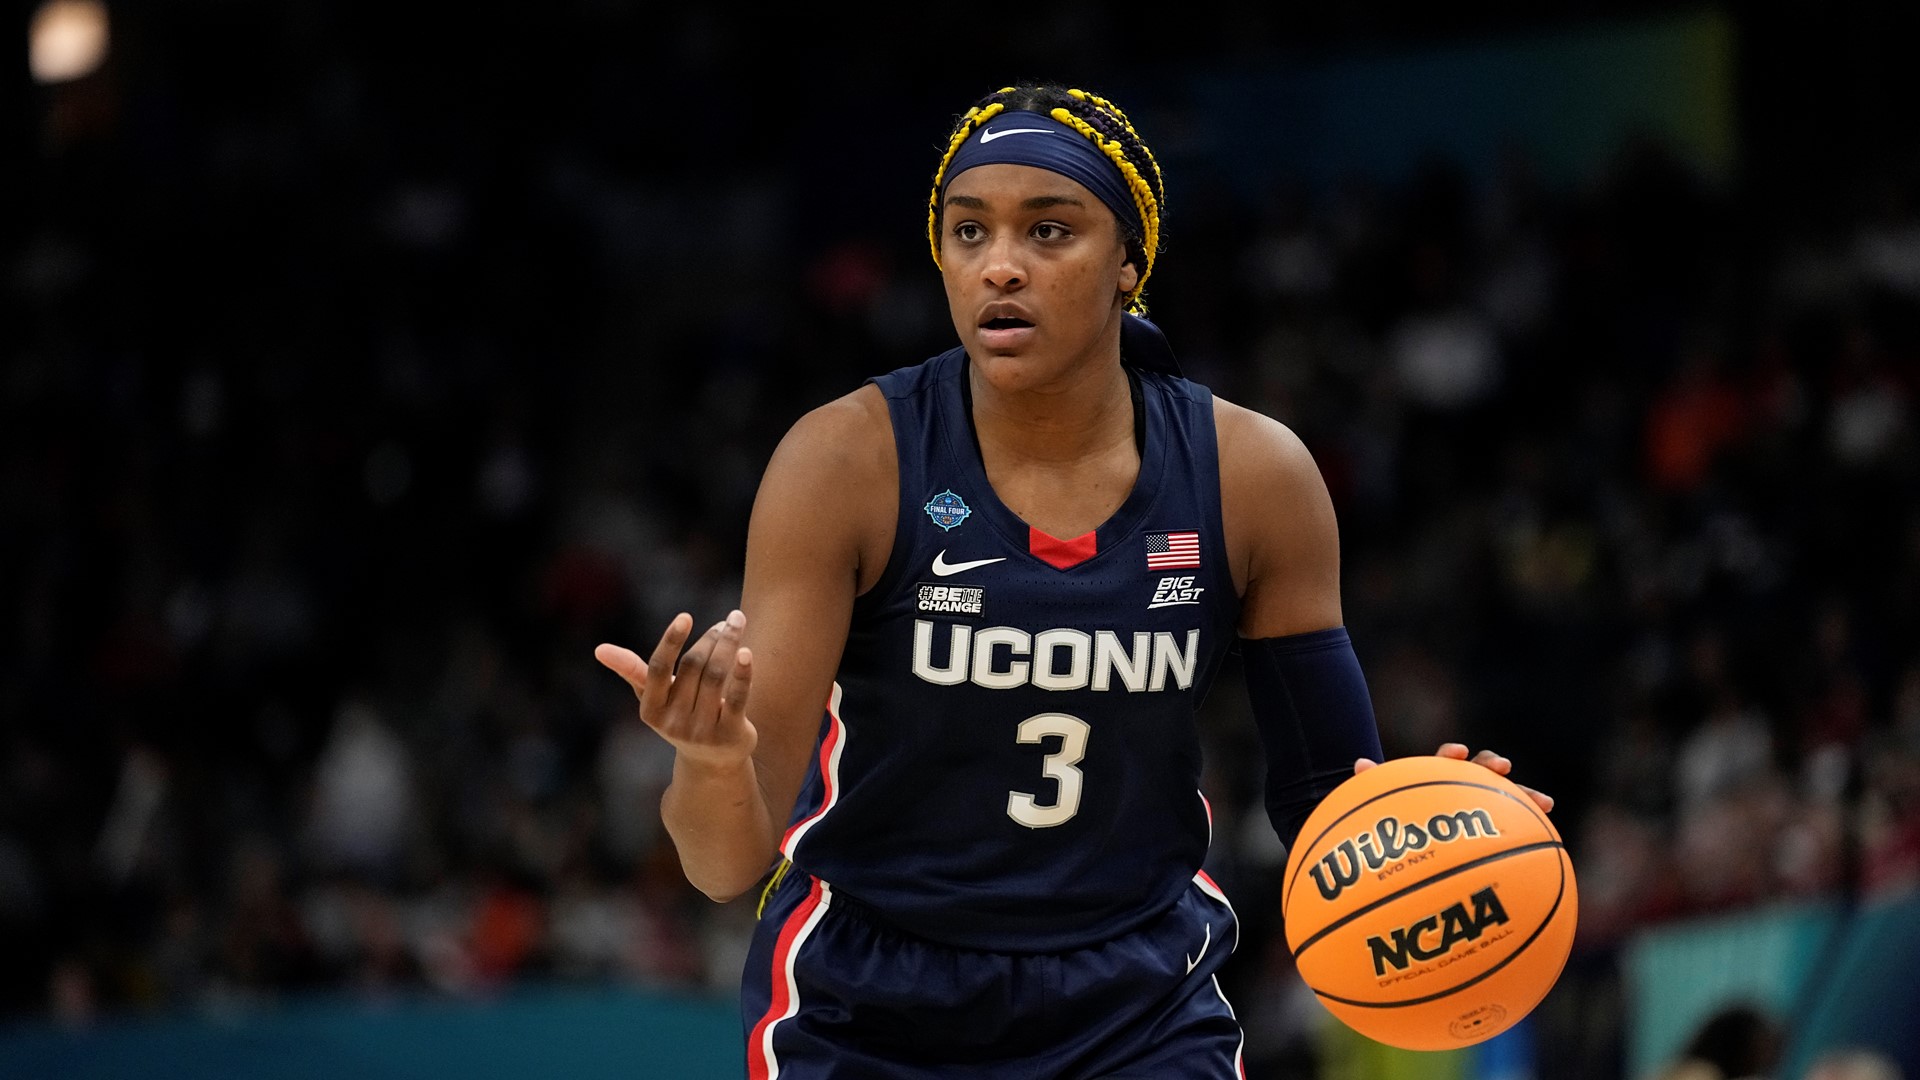 After last year's heartbreak at the NCAA Championship Finals, UConn's Aaliyah Edwards says the Huskies are ready to fight their way back to the top.